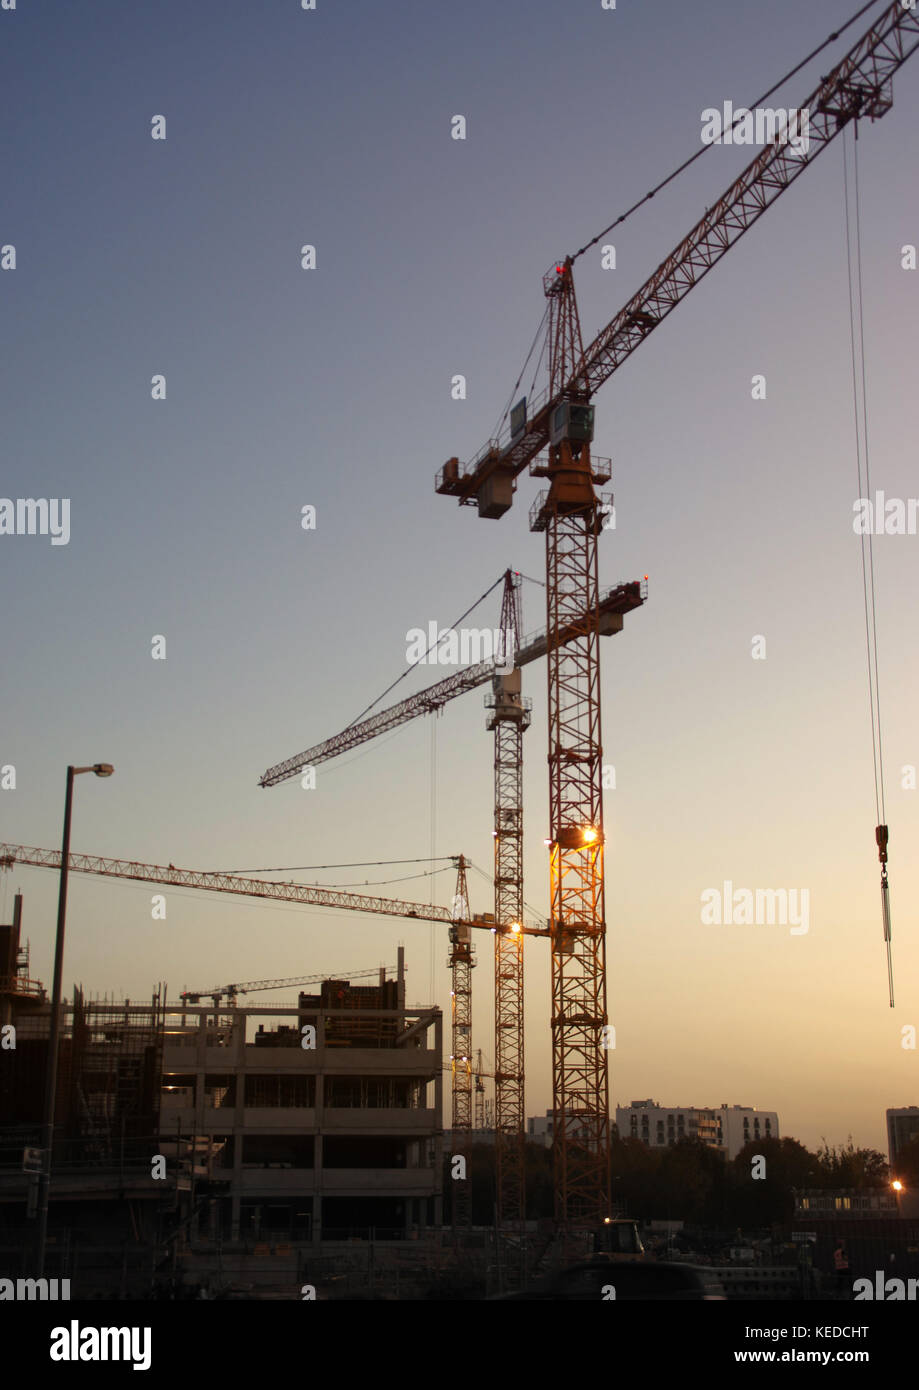 Construction of new homes. Silhouettes of cranes on the background of the evening sky. Stock Photo